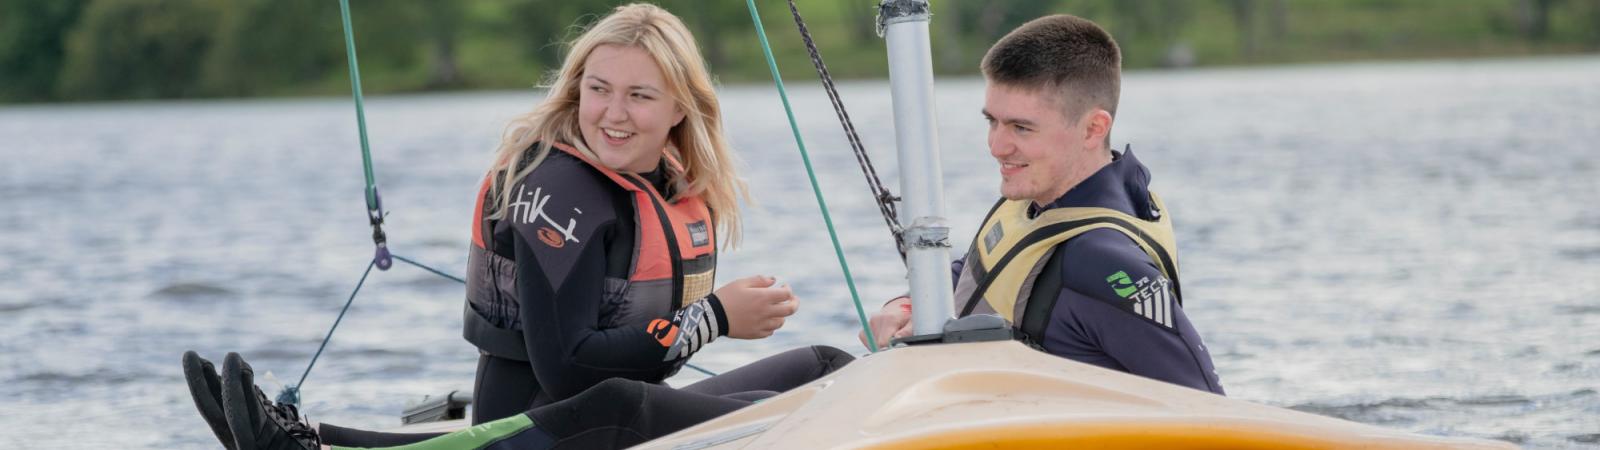 Watersports in Dumfries and Galloway